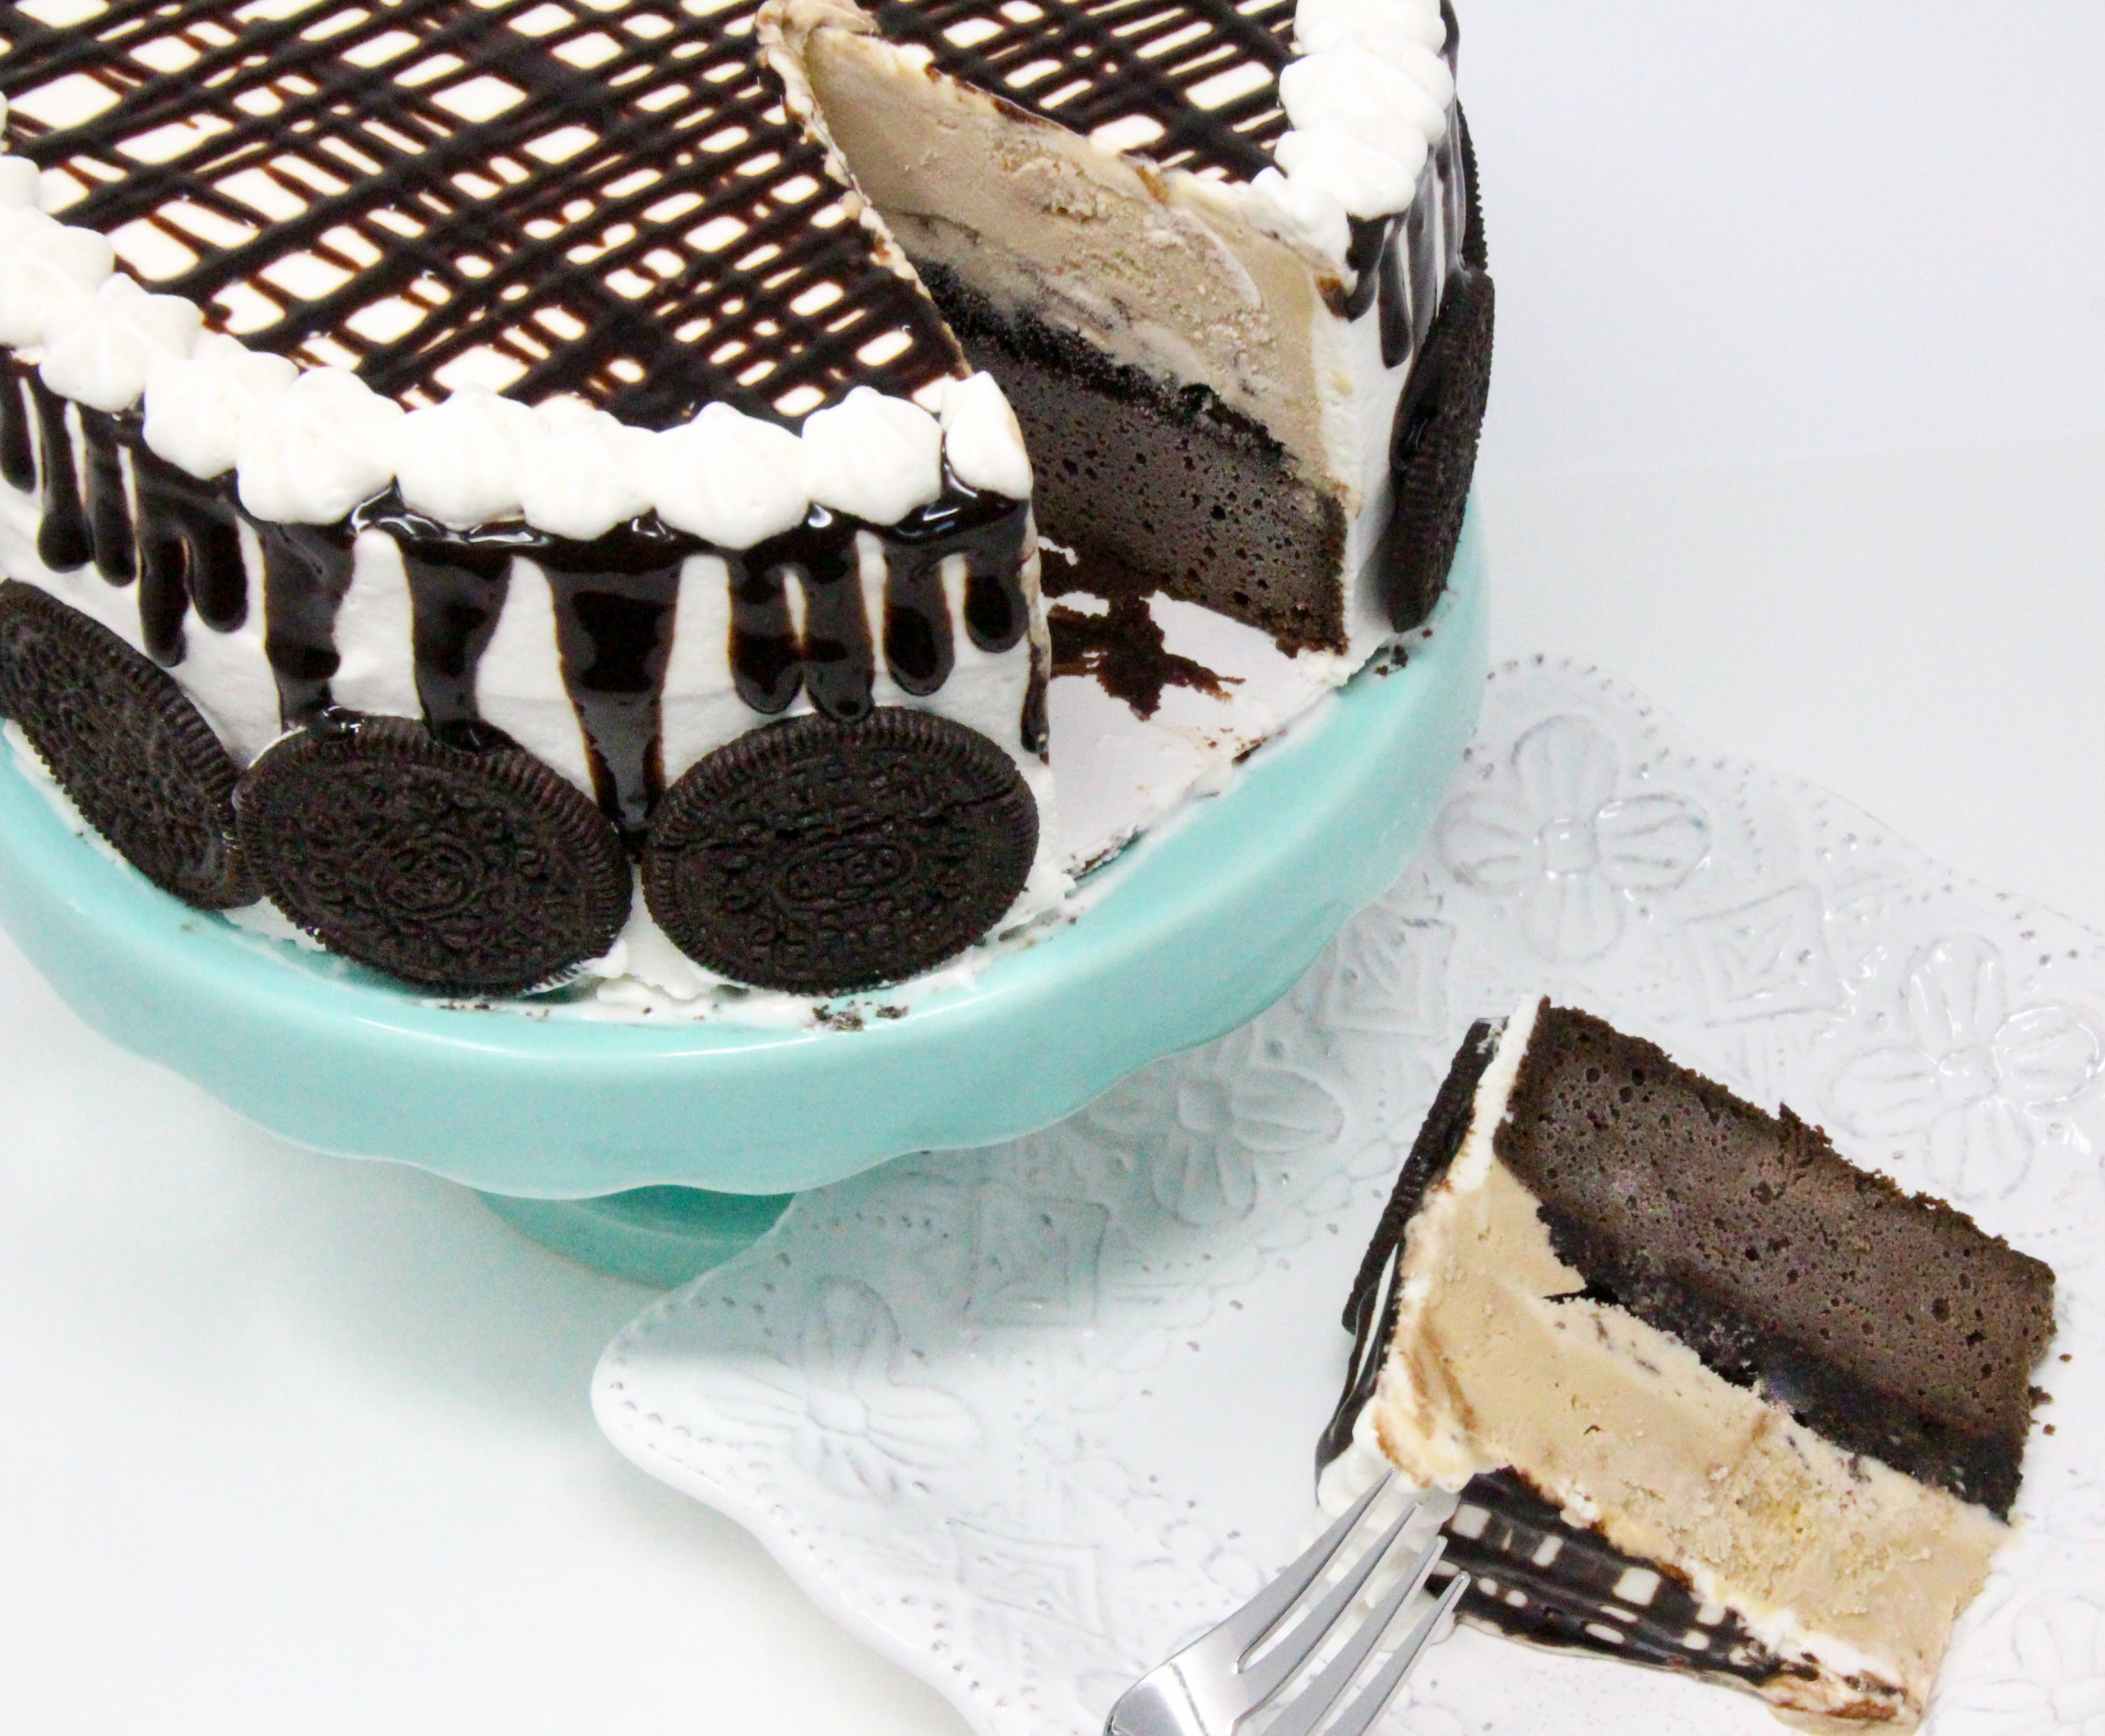 River's Ice Cream Cake is a delectable frozen treat that when served makes any occasion extra special. Using convenience products, it's easier to make than you might think. Recipe shared with permission granted by Maggie Toussaint, author of SHRIMPLY DEAD.